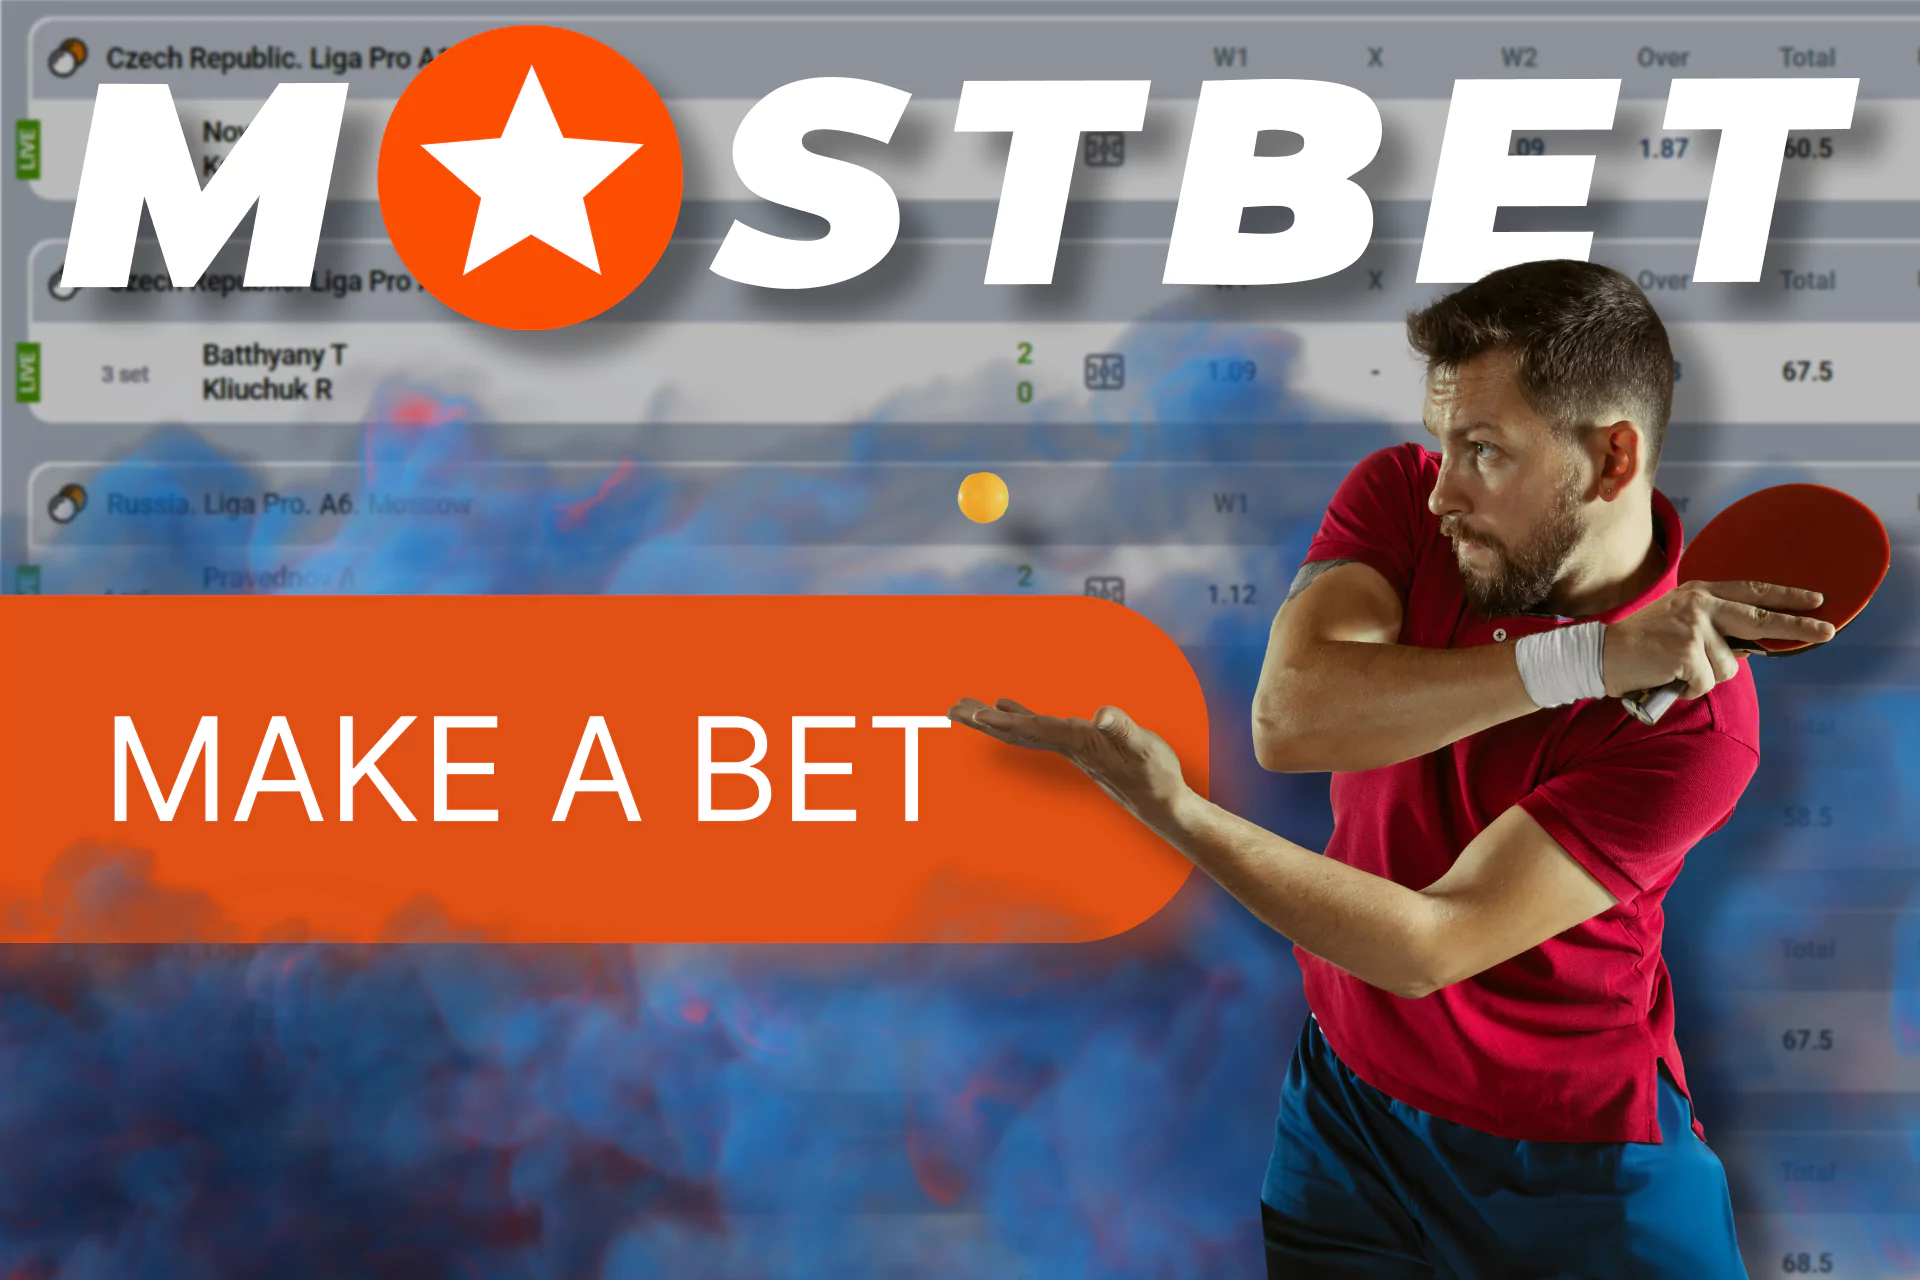 At Mostbet, bet online on table tennis, hold your favorite players.